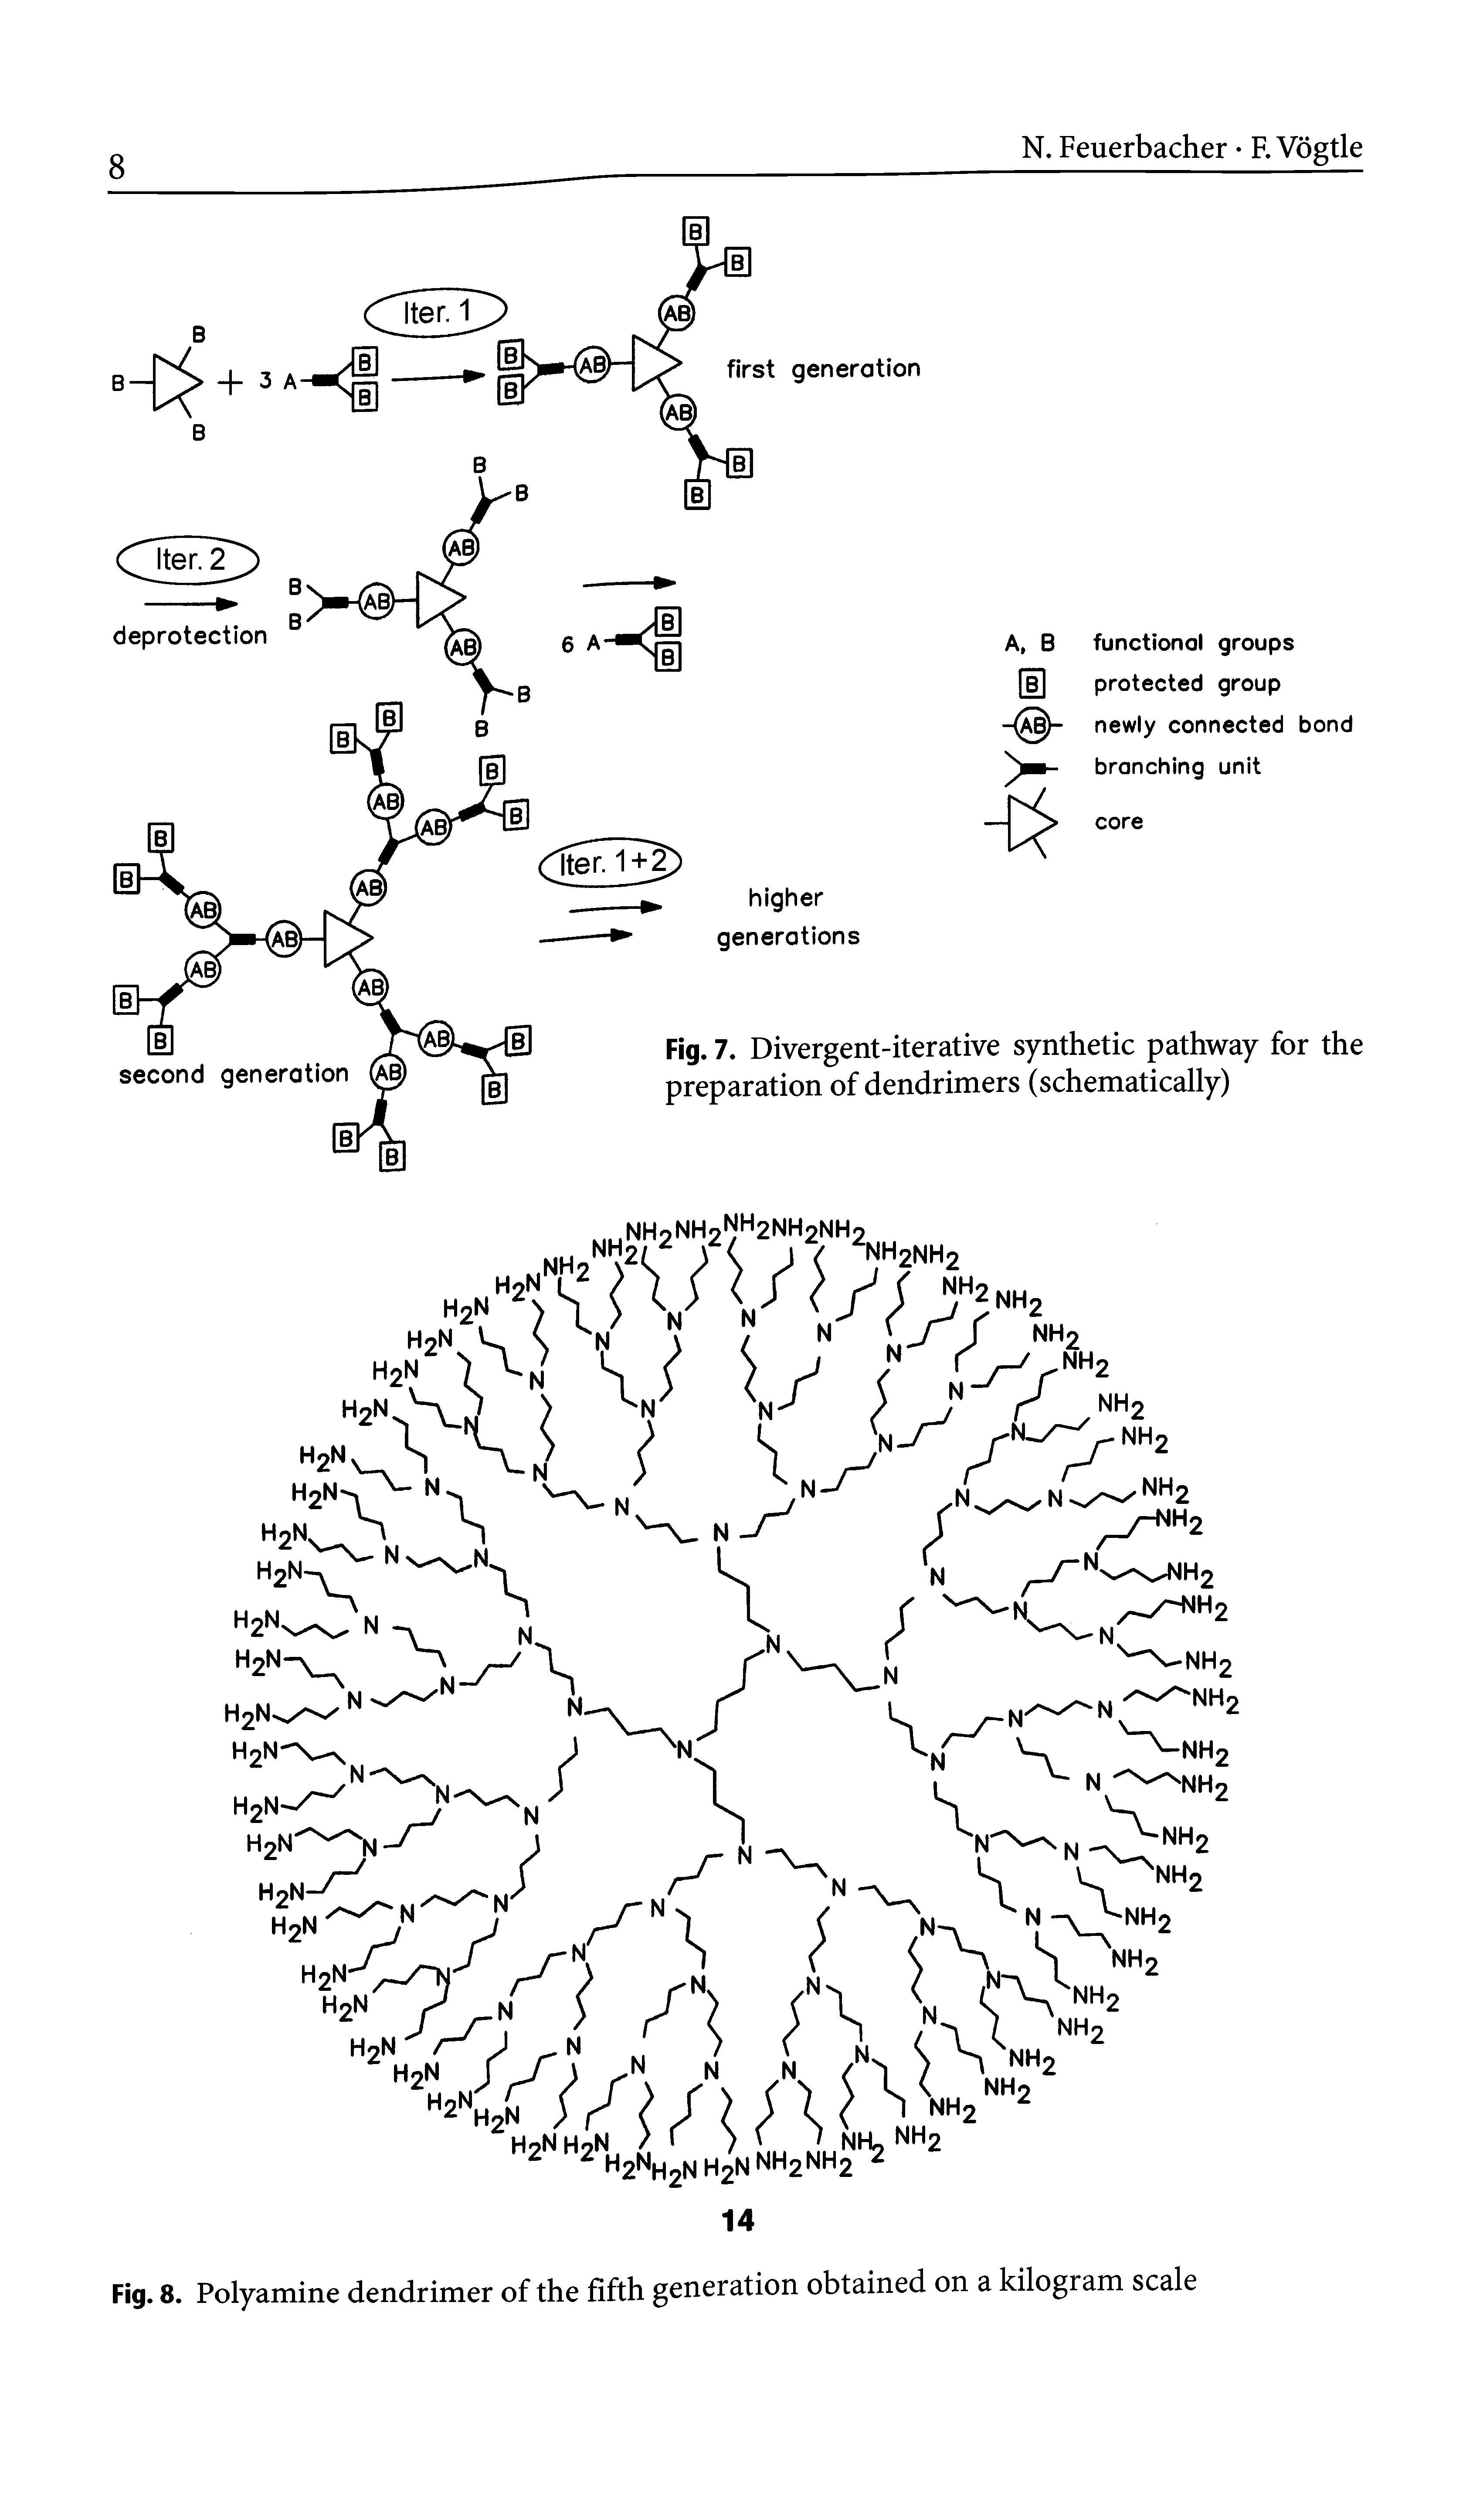 Fig. 8. Polyamine dendrimer of the fifth generation obtained on a kilogram scale...